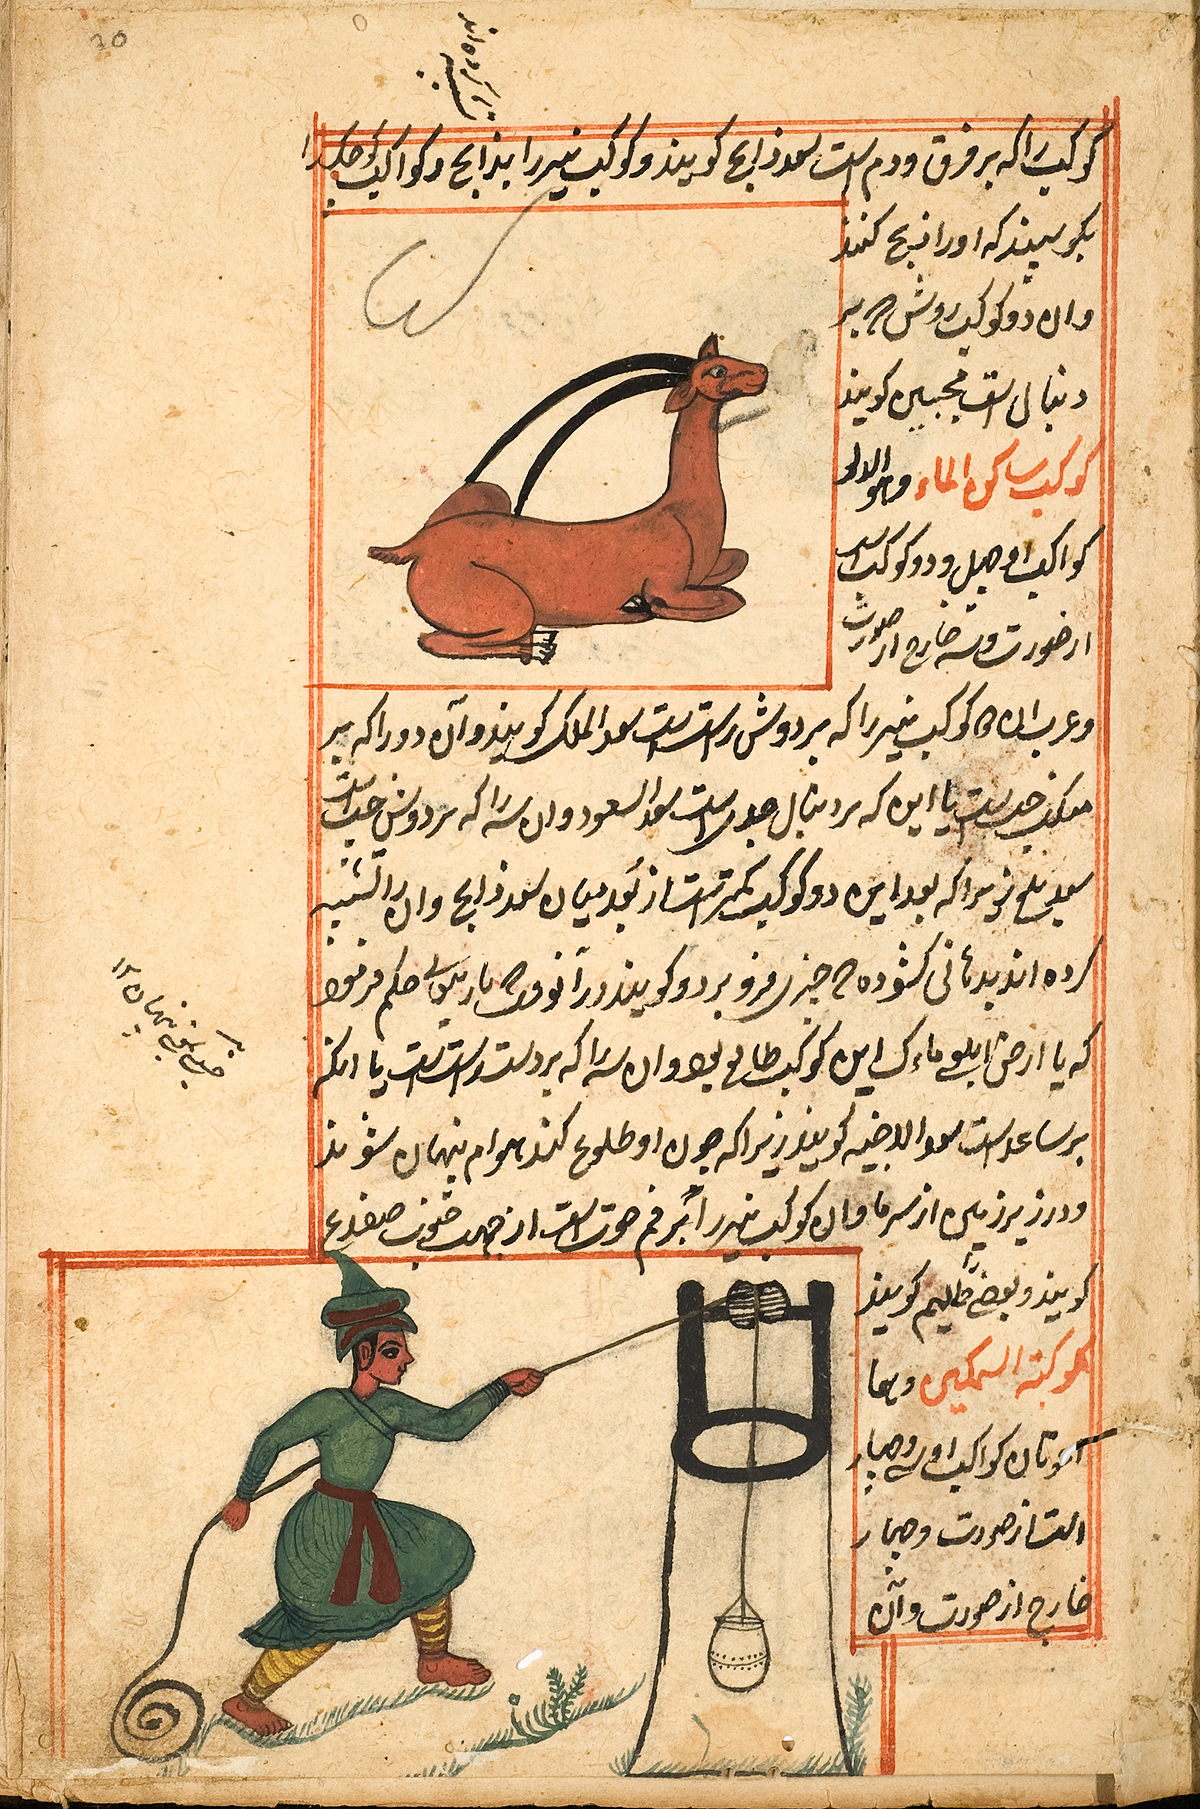 The zodiac constellation Capricorn represented as a brown seated goat with long horns, and the constellation Aquarius represented as a man in a green robe drawing water from a well; both images surrounded by Persian text and a red double ruled border.